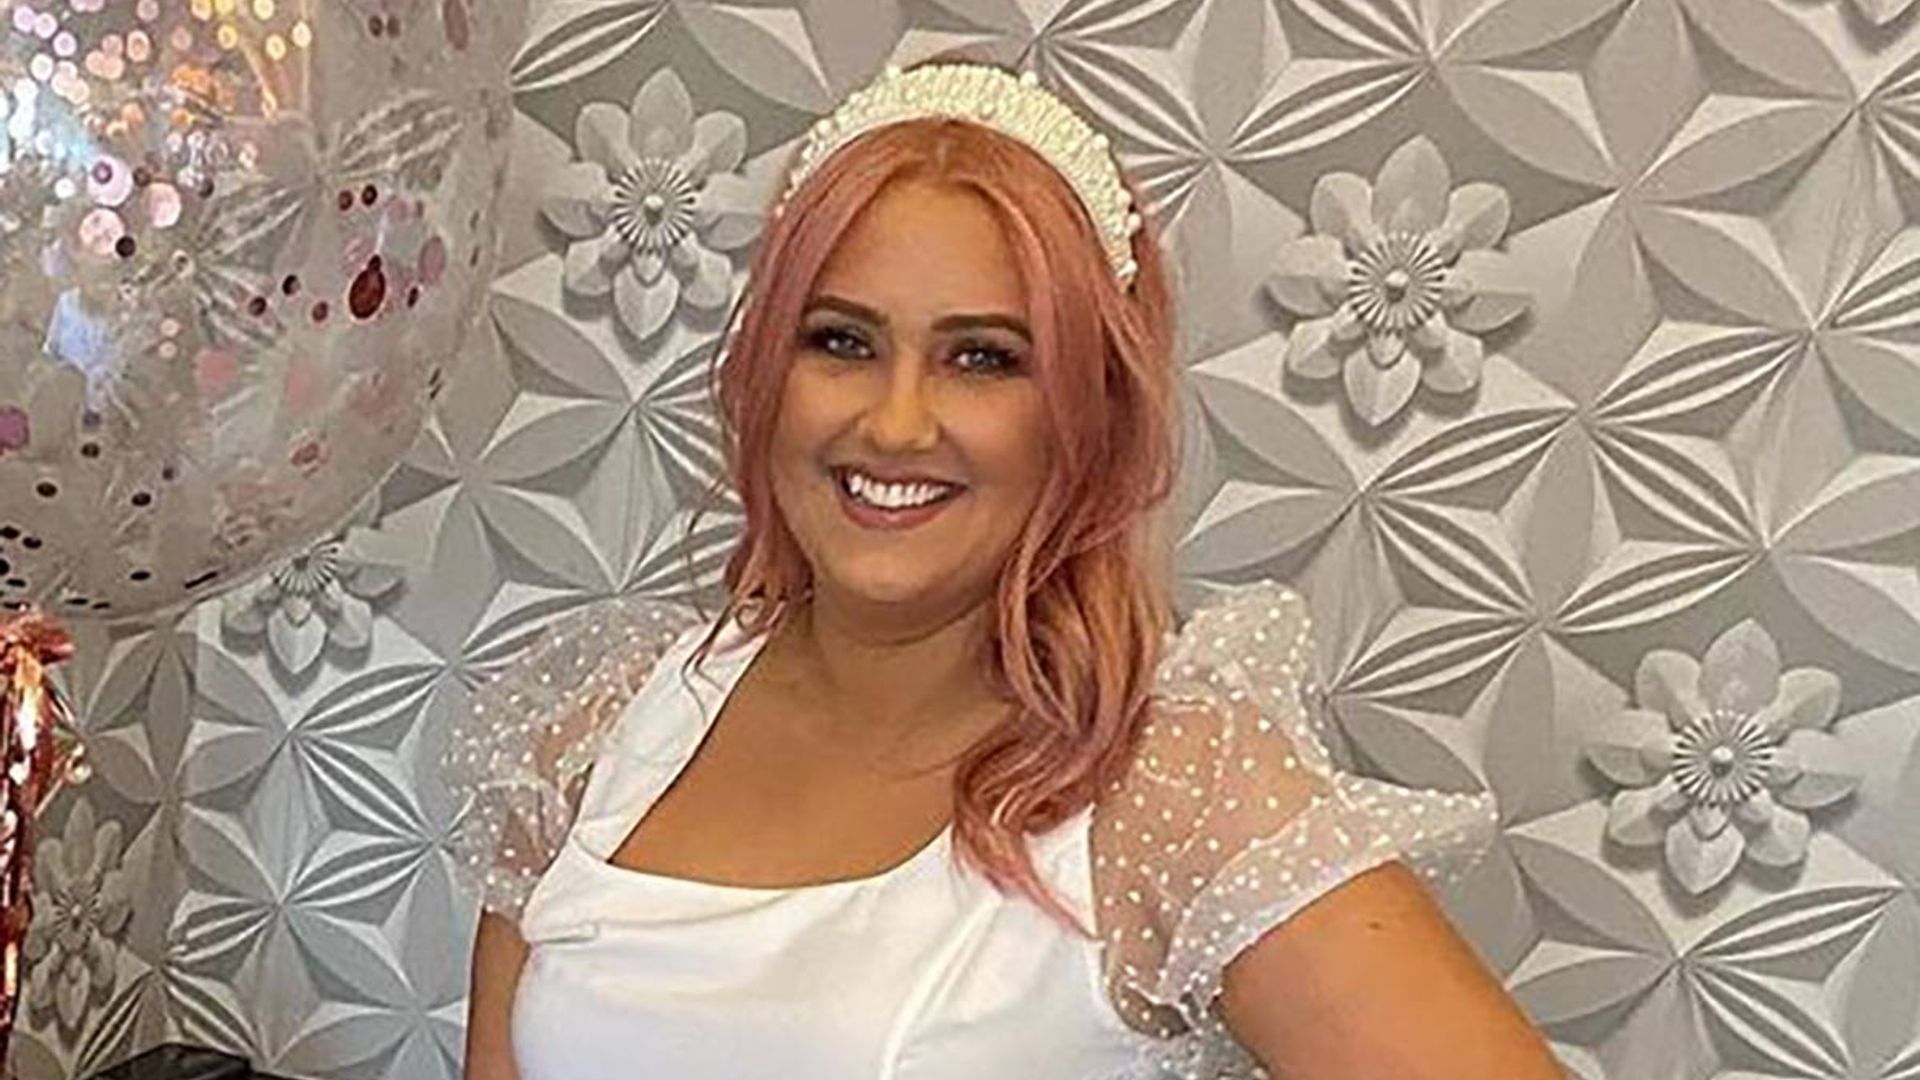 Gogglebox's Ellie Warner unveils date night makeover - and you won't believe how cheap her dress is